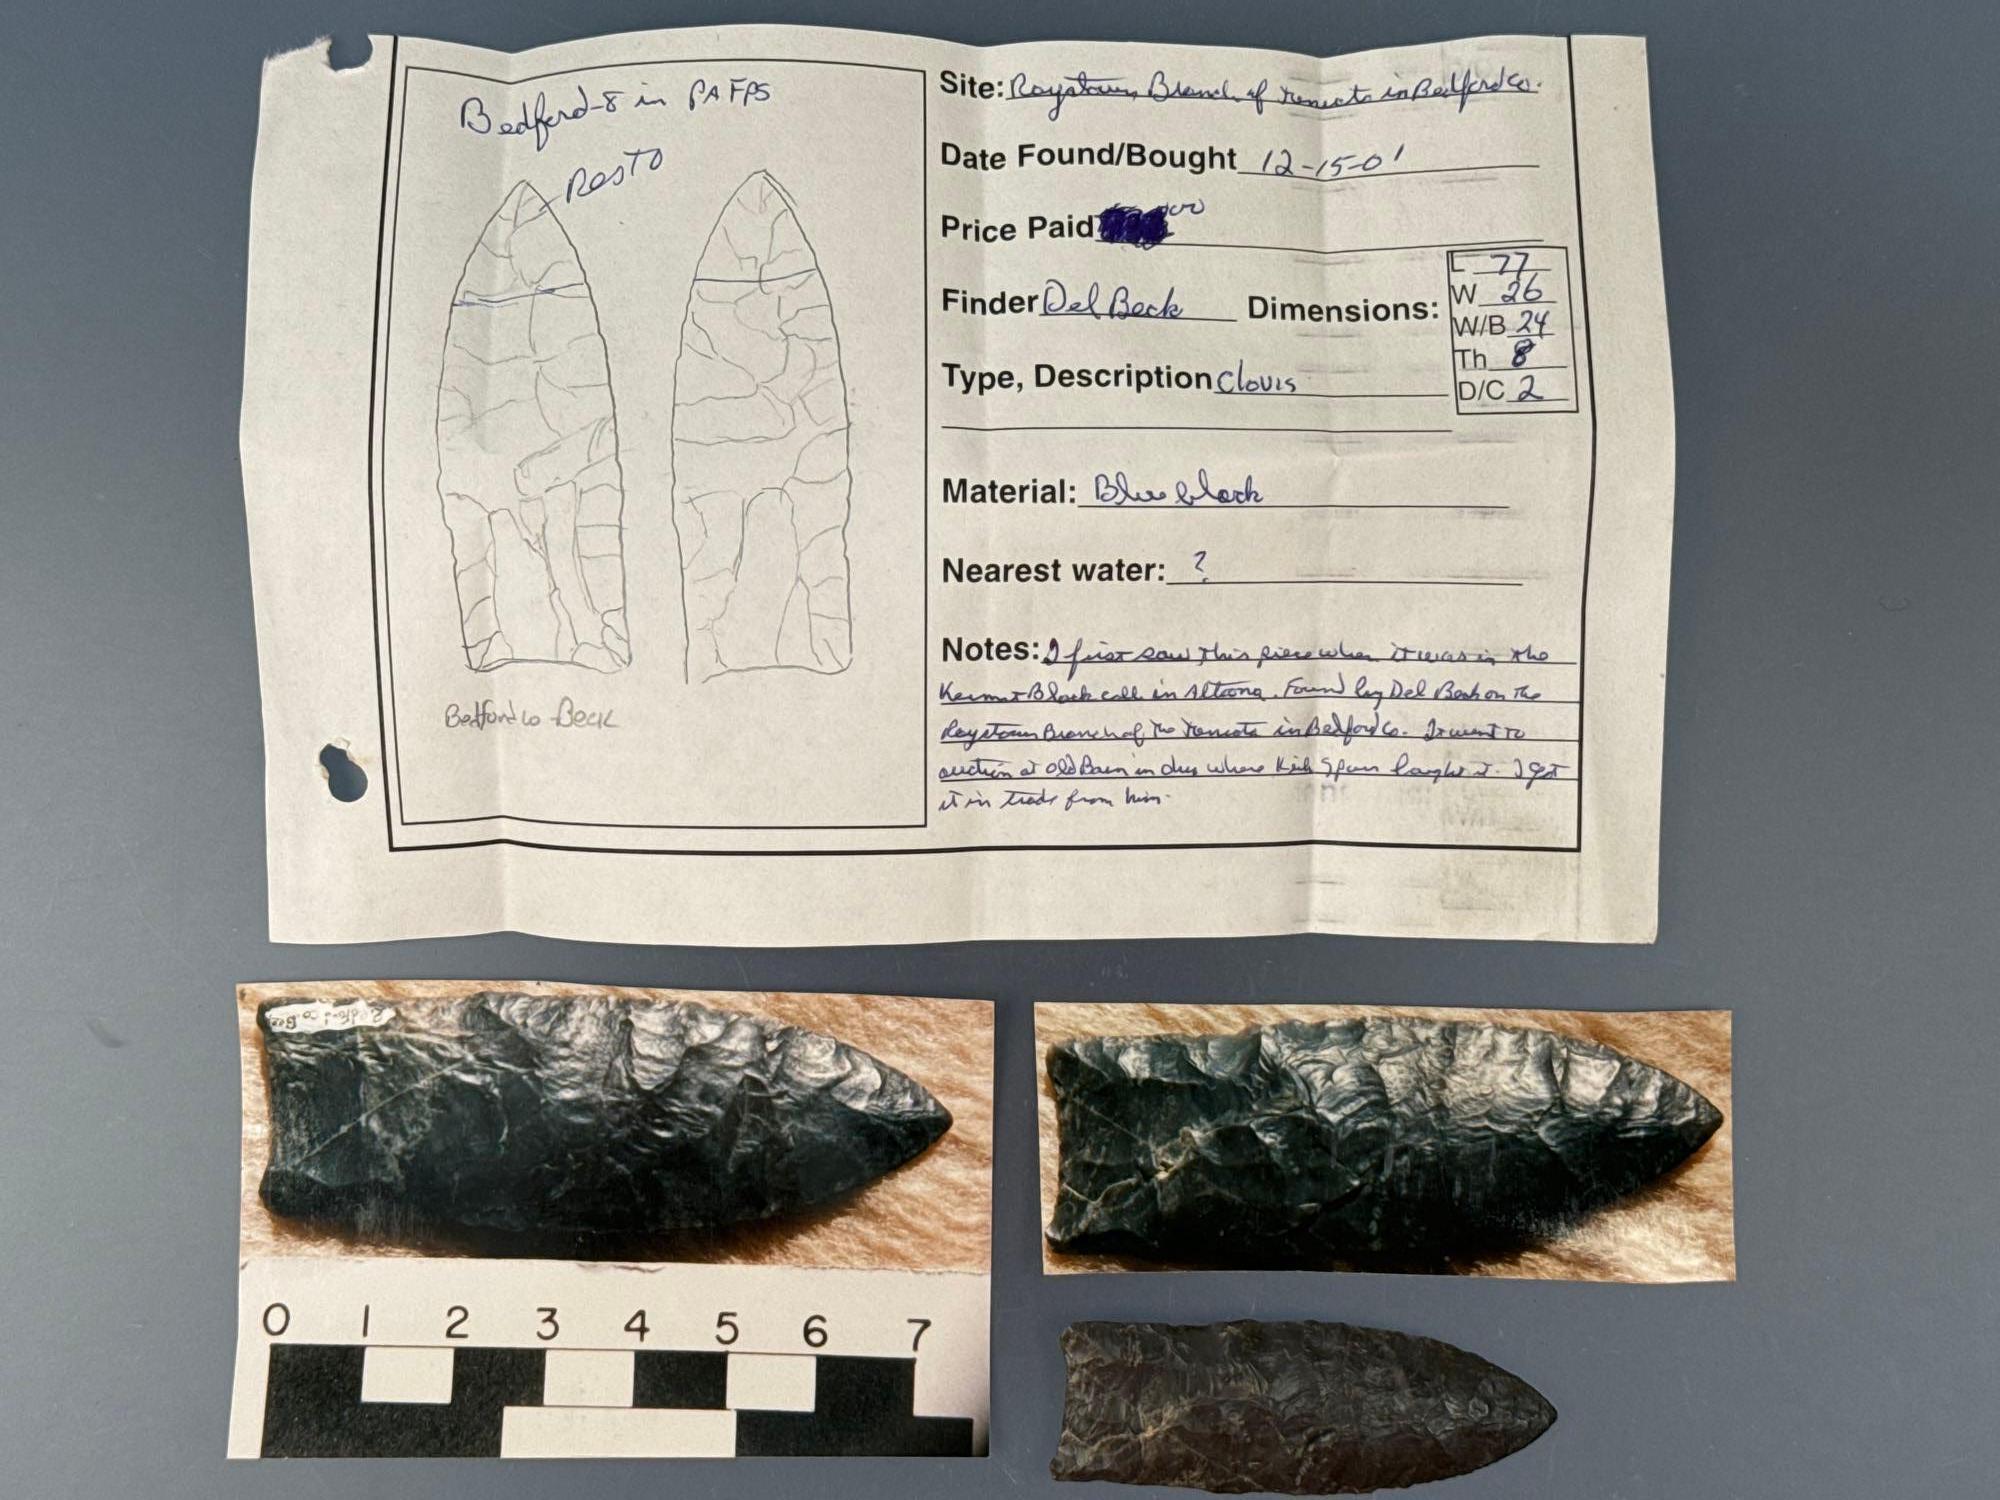 3" Fluted Paleo Clovis Point, 1/2" of Tip is Restored, Found at the Raystown Bend in Bedford Co., PA